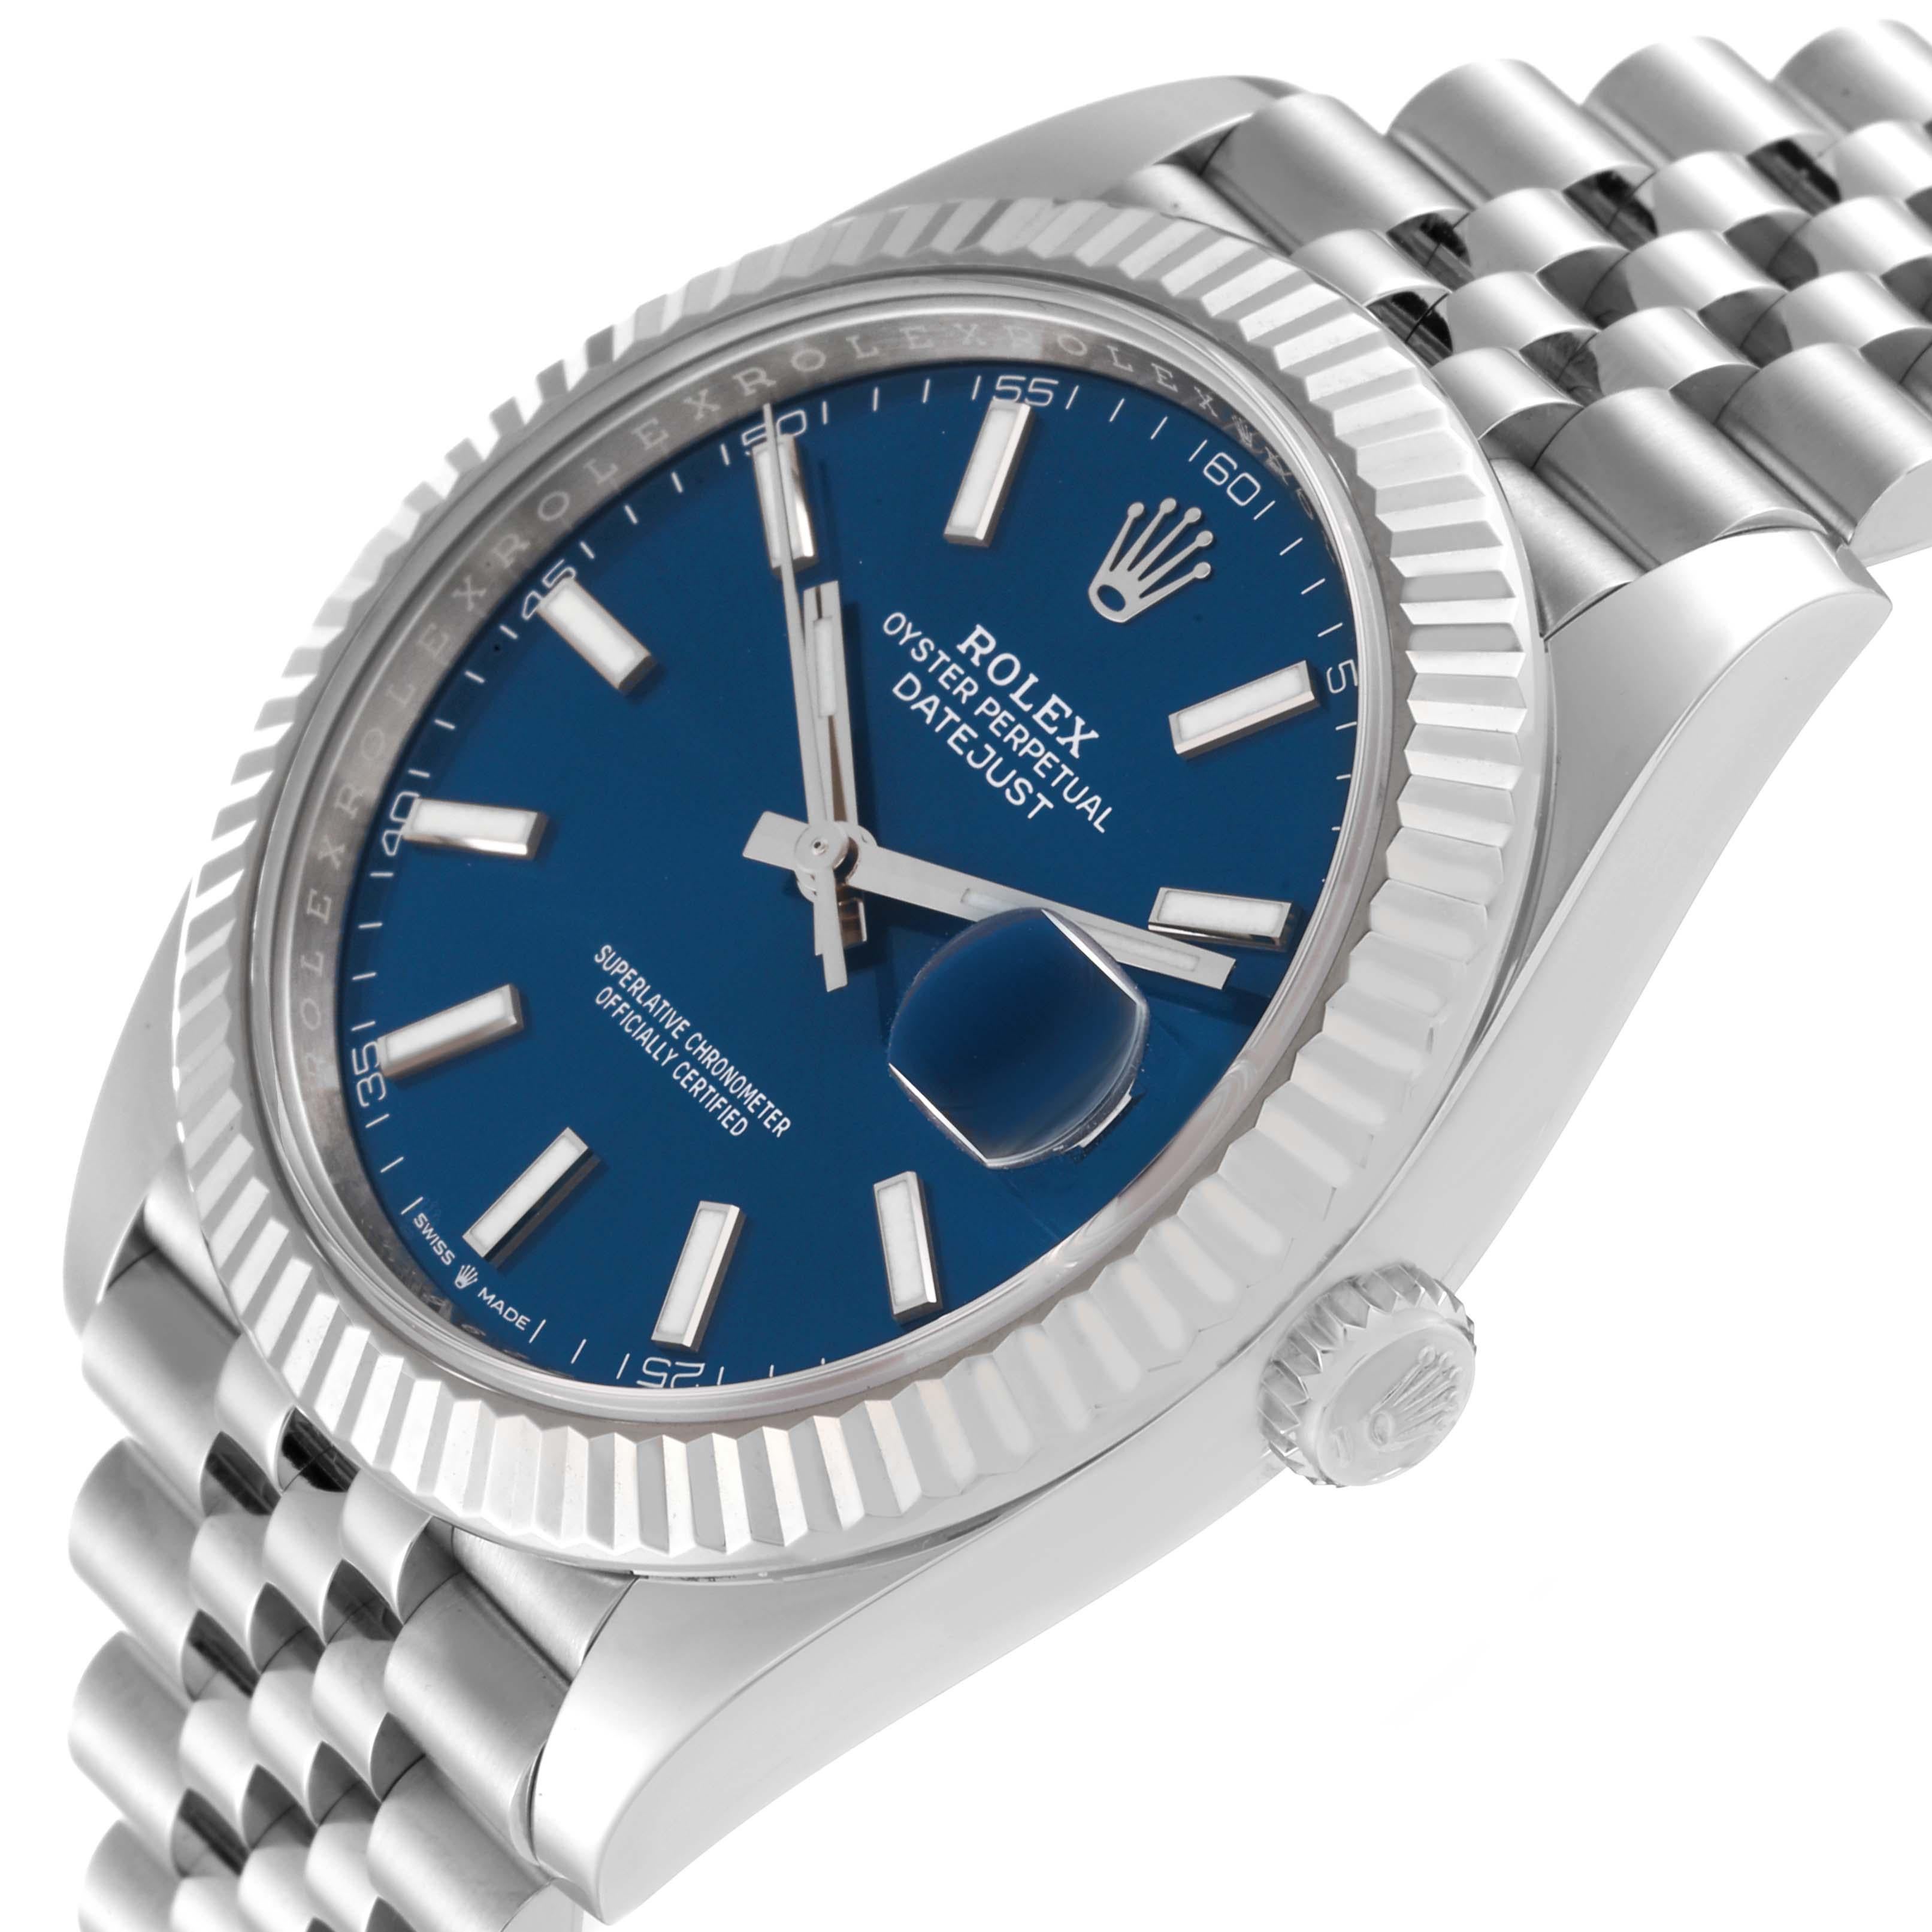 Rolex Datejust 41 Steel White Gold Blue Dial Mens Watch 126334 Box Card. Officially certified chronometer automatic self-winding movement. Stainless steel case 41 mm in diameter. Rolex logo on a crown. 18K white gold fluted bezel. Scratch resistant